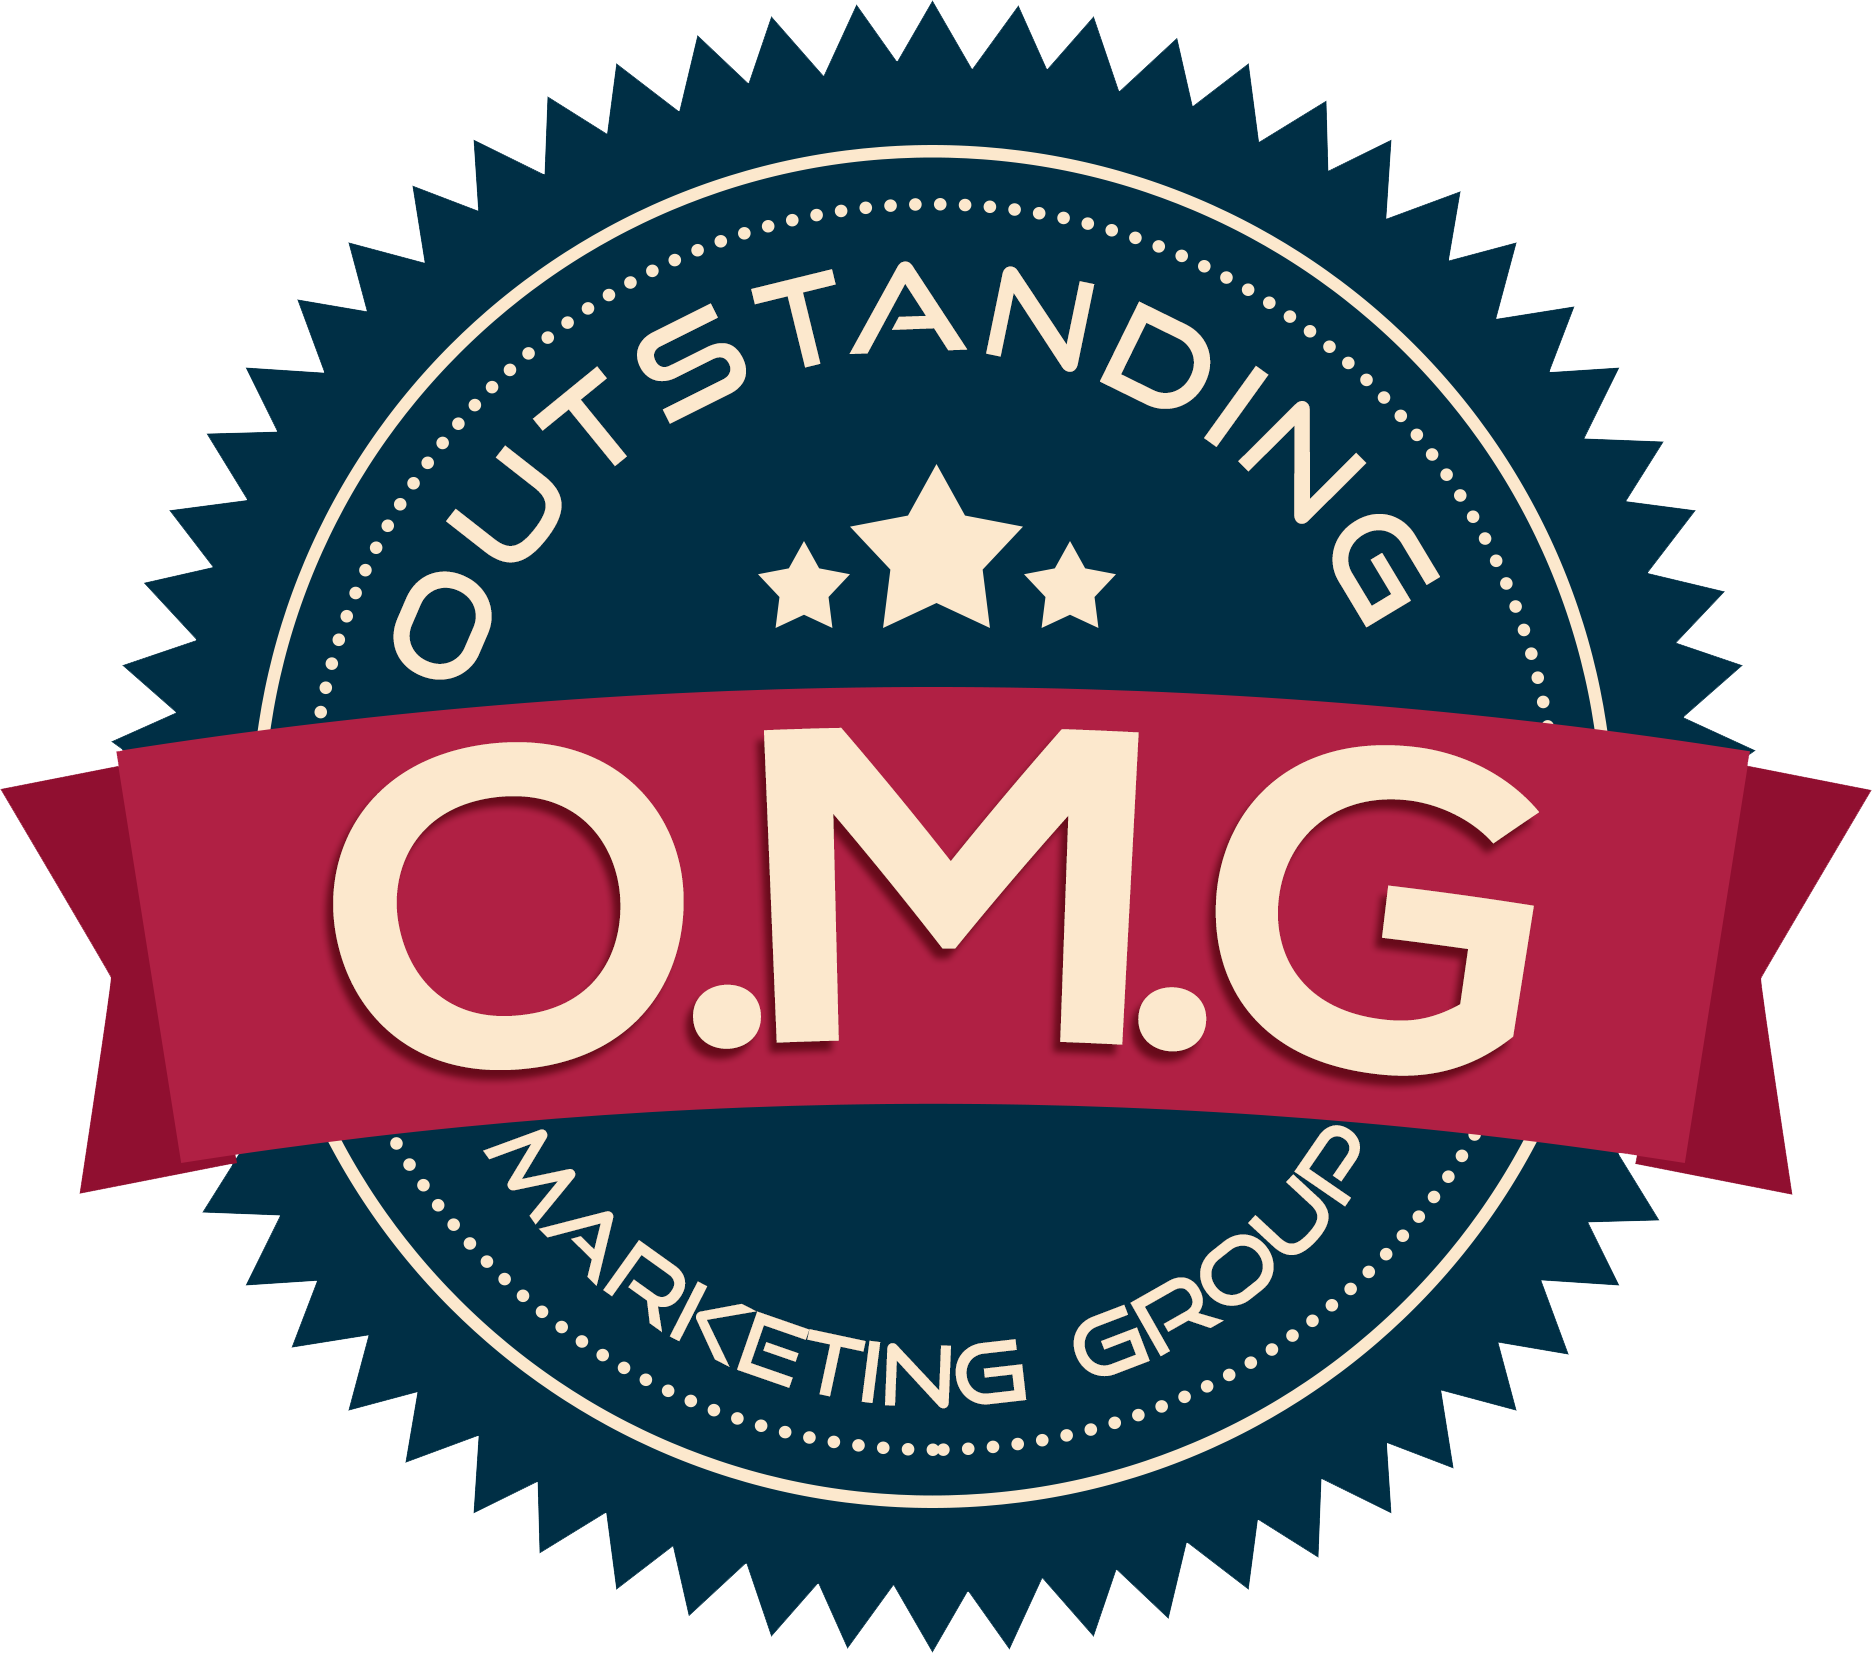 Outstanding Marketing Group